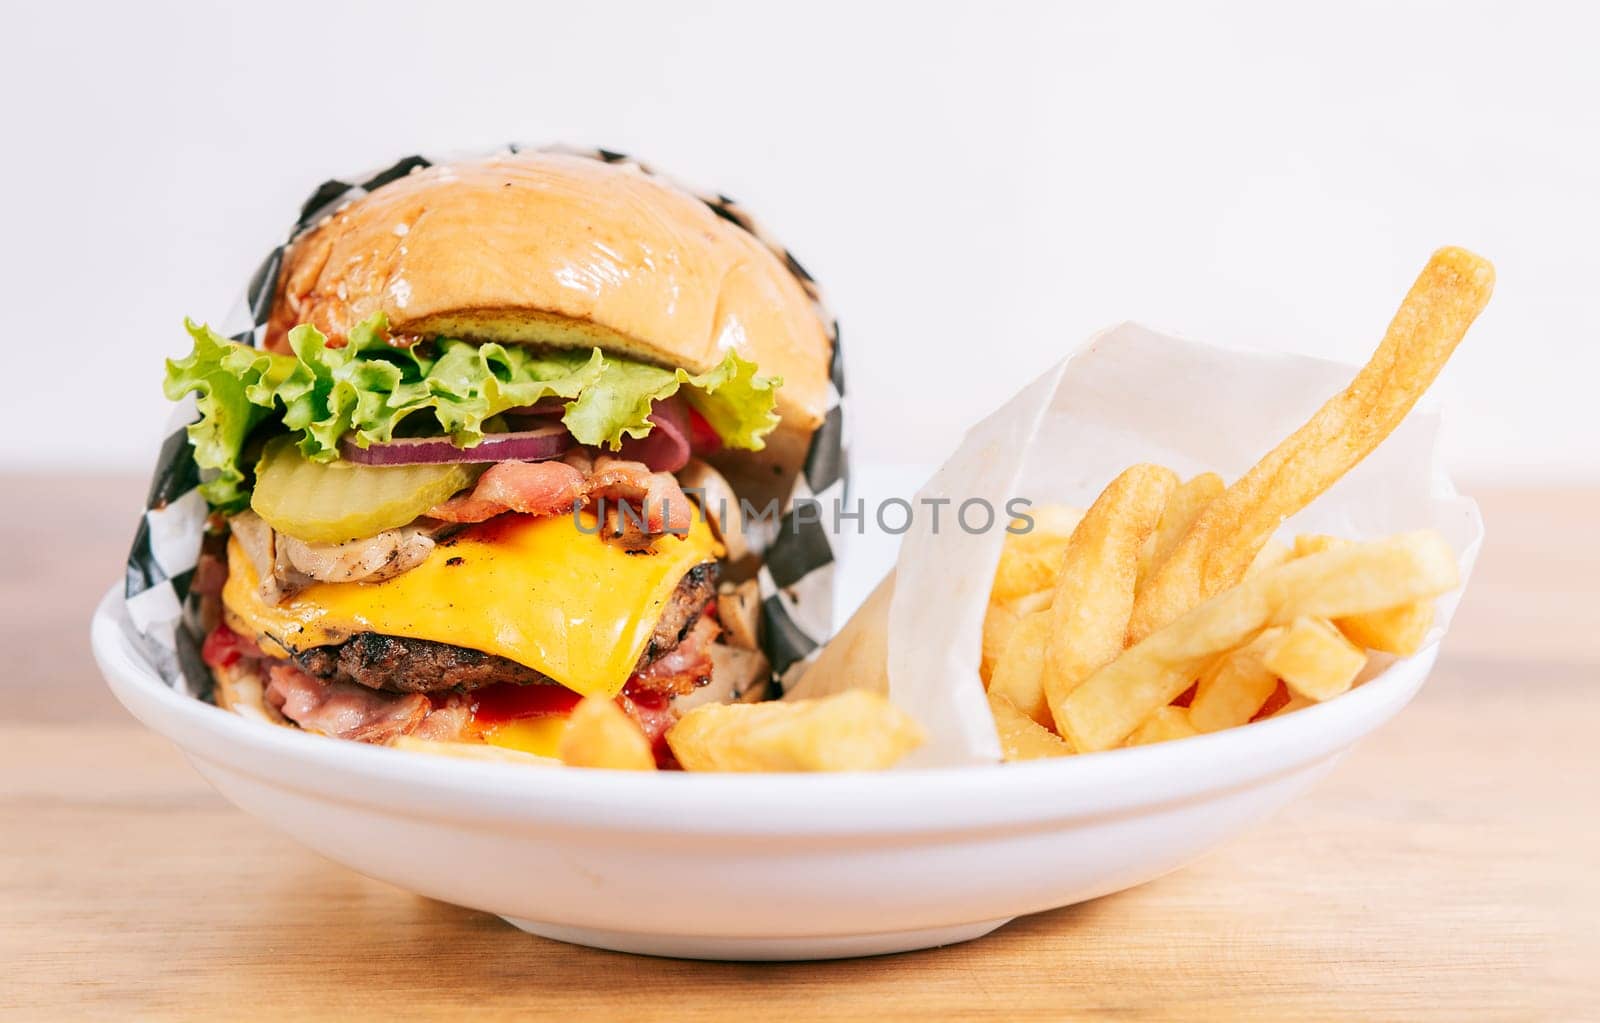 Cheeseburger with fries on wooden table. Close up of a delicious hamburger with french fries on wooden table with copy space